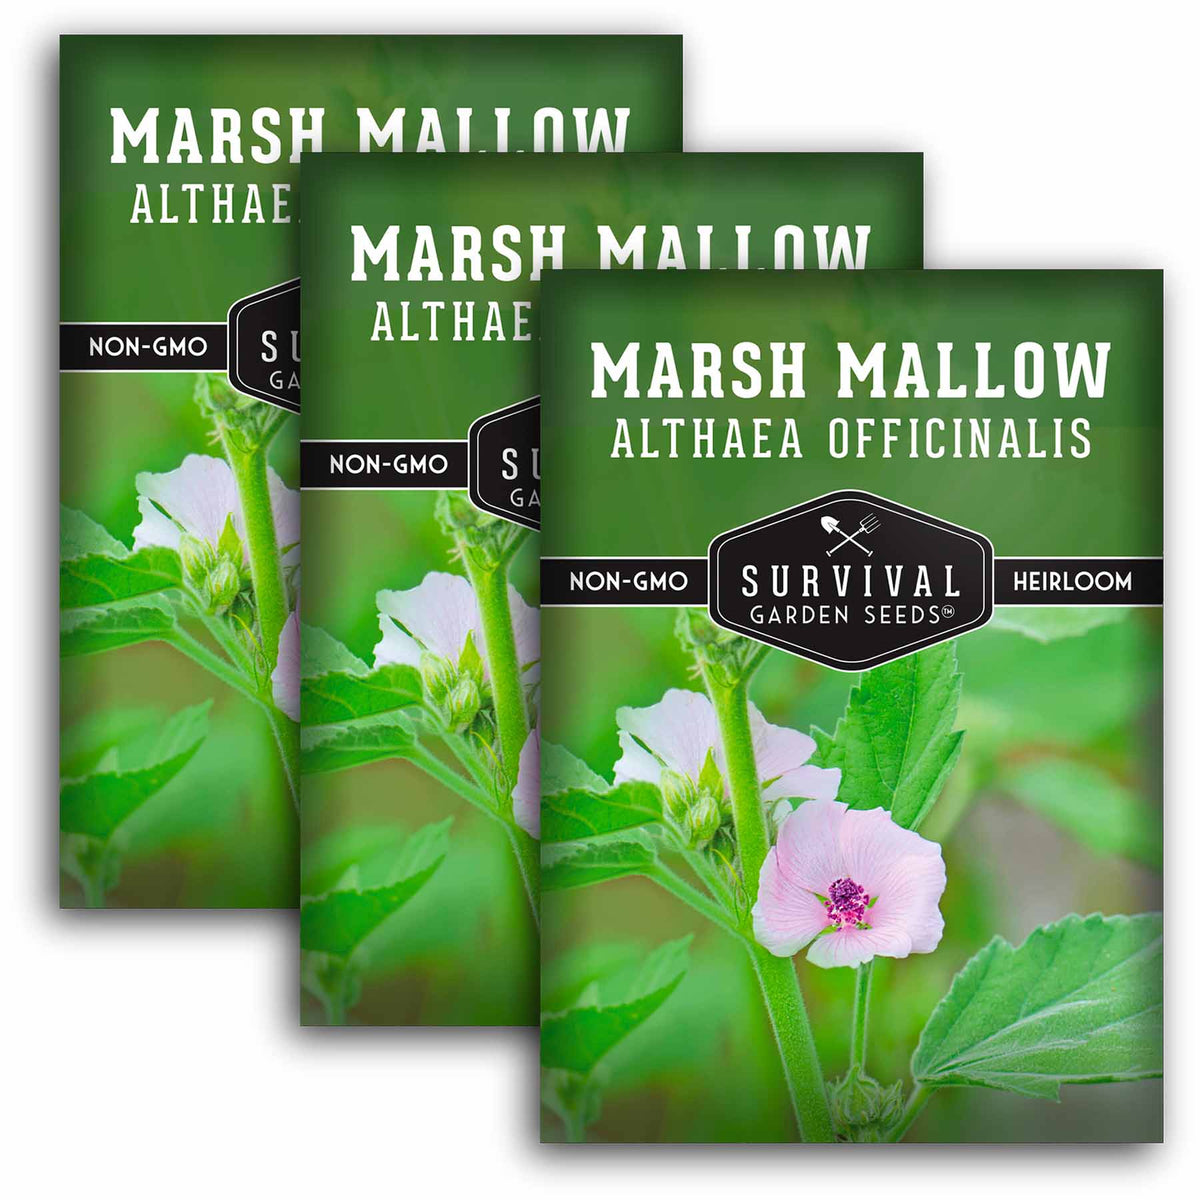 3 packets of Marsh Mallow seeds